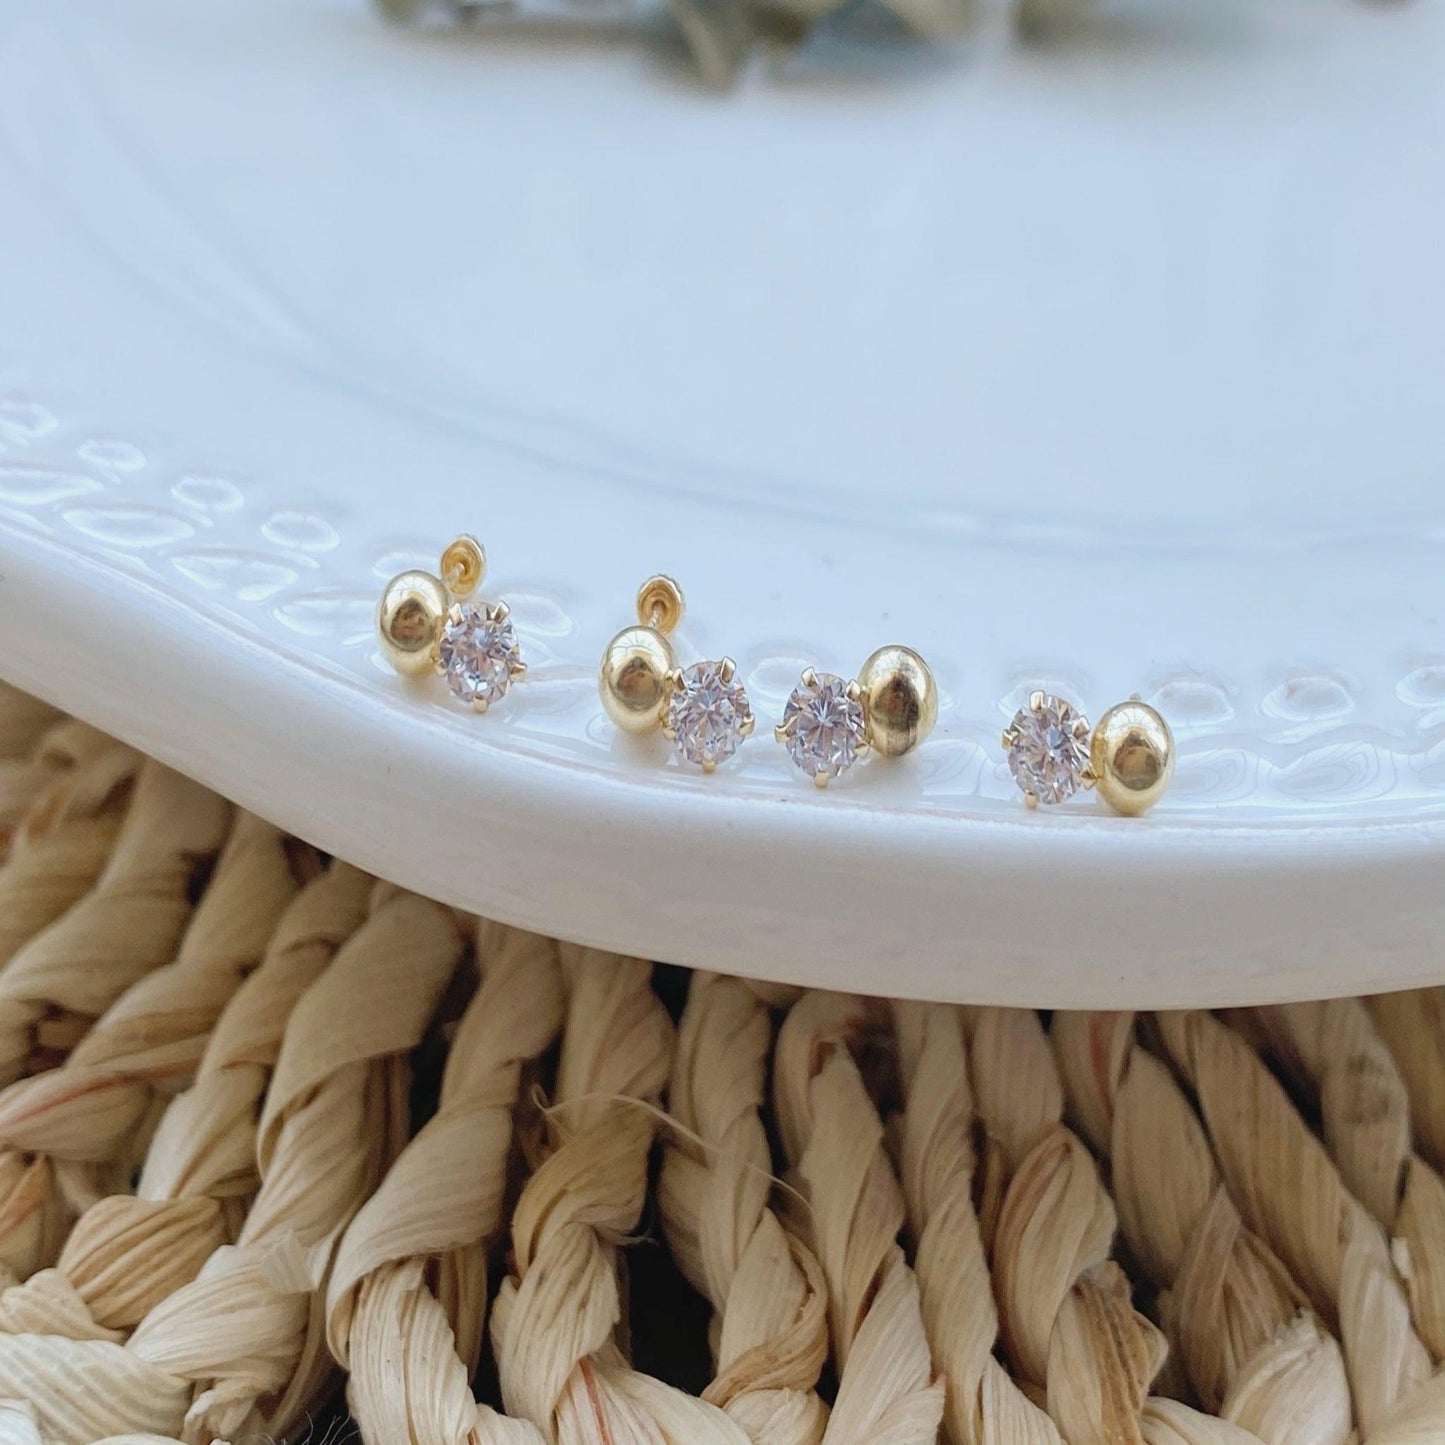 Simple and delicate, these post earrings are perfect for everyday wear. These stunning studs are crafted of 10K gold with a CZ drop and have screw backs for added security. The light weight design makes them comfortable to wear.